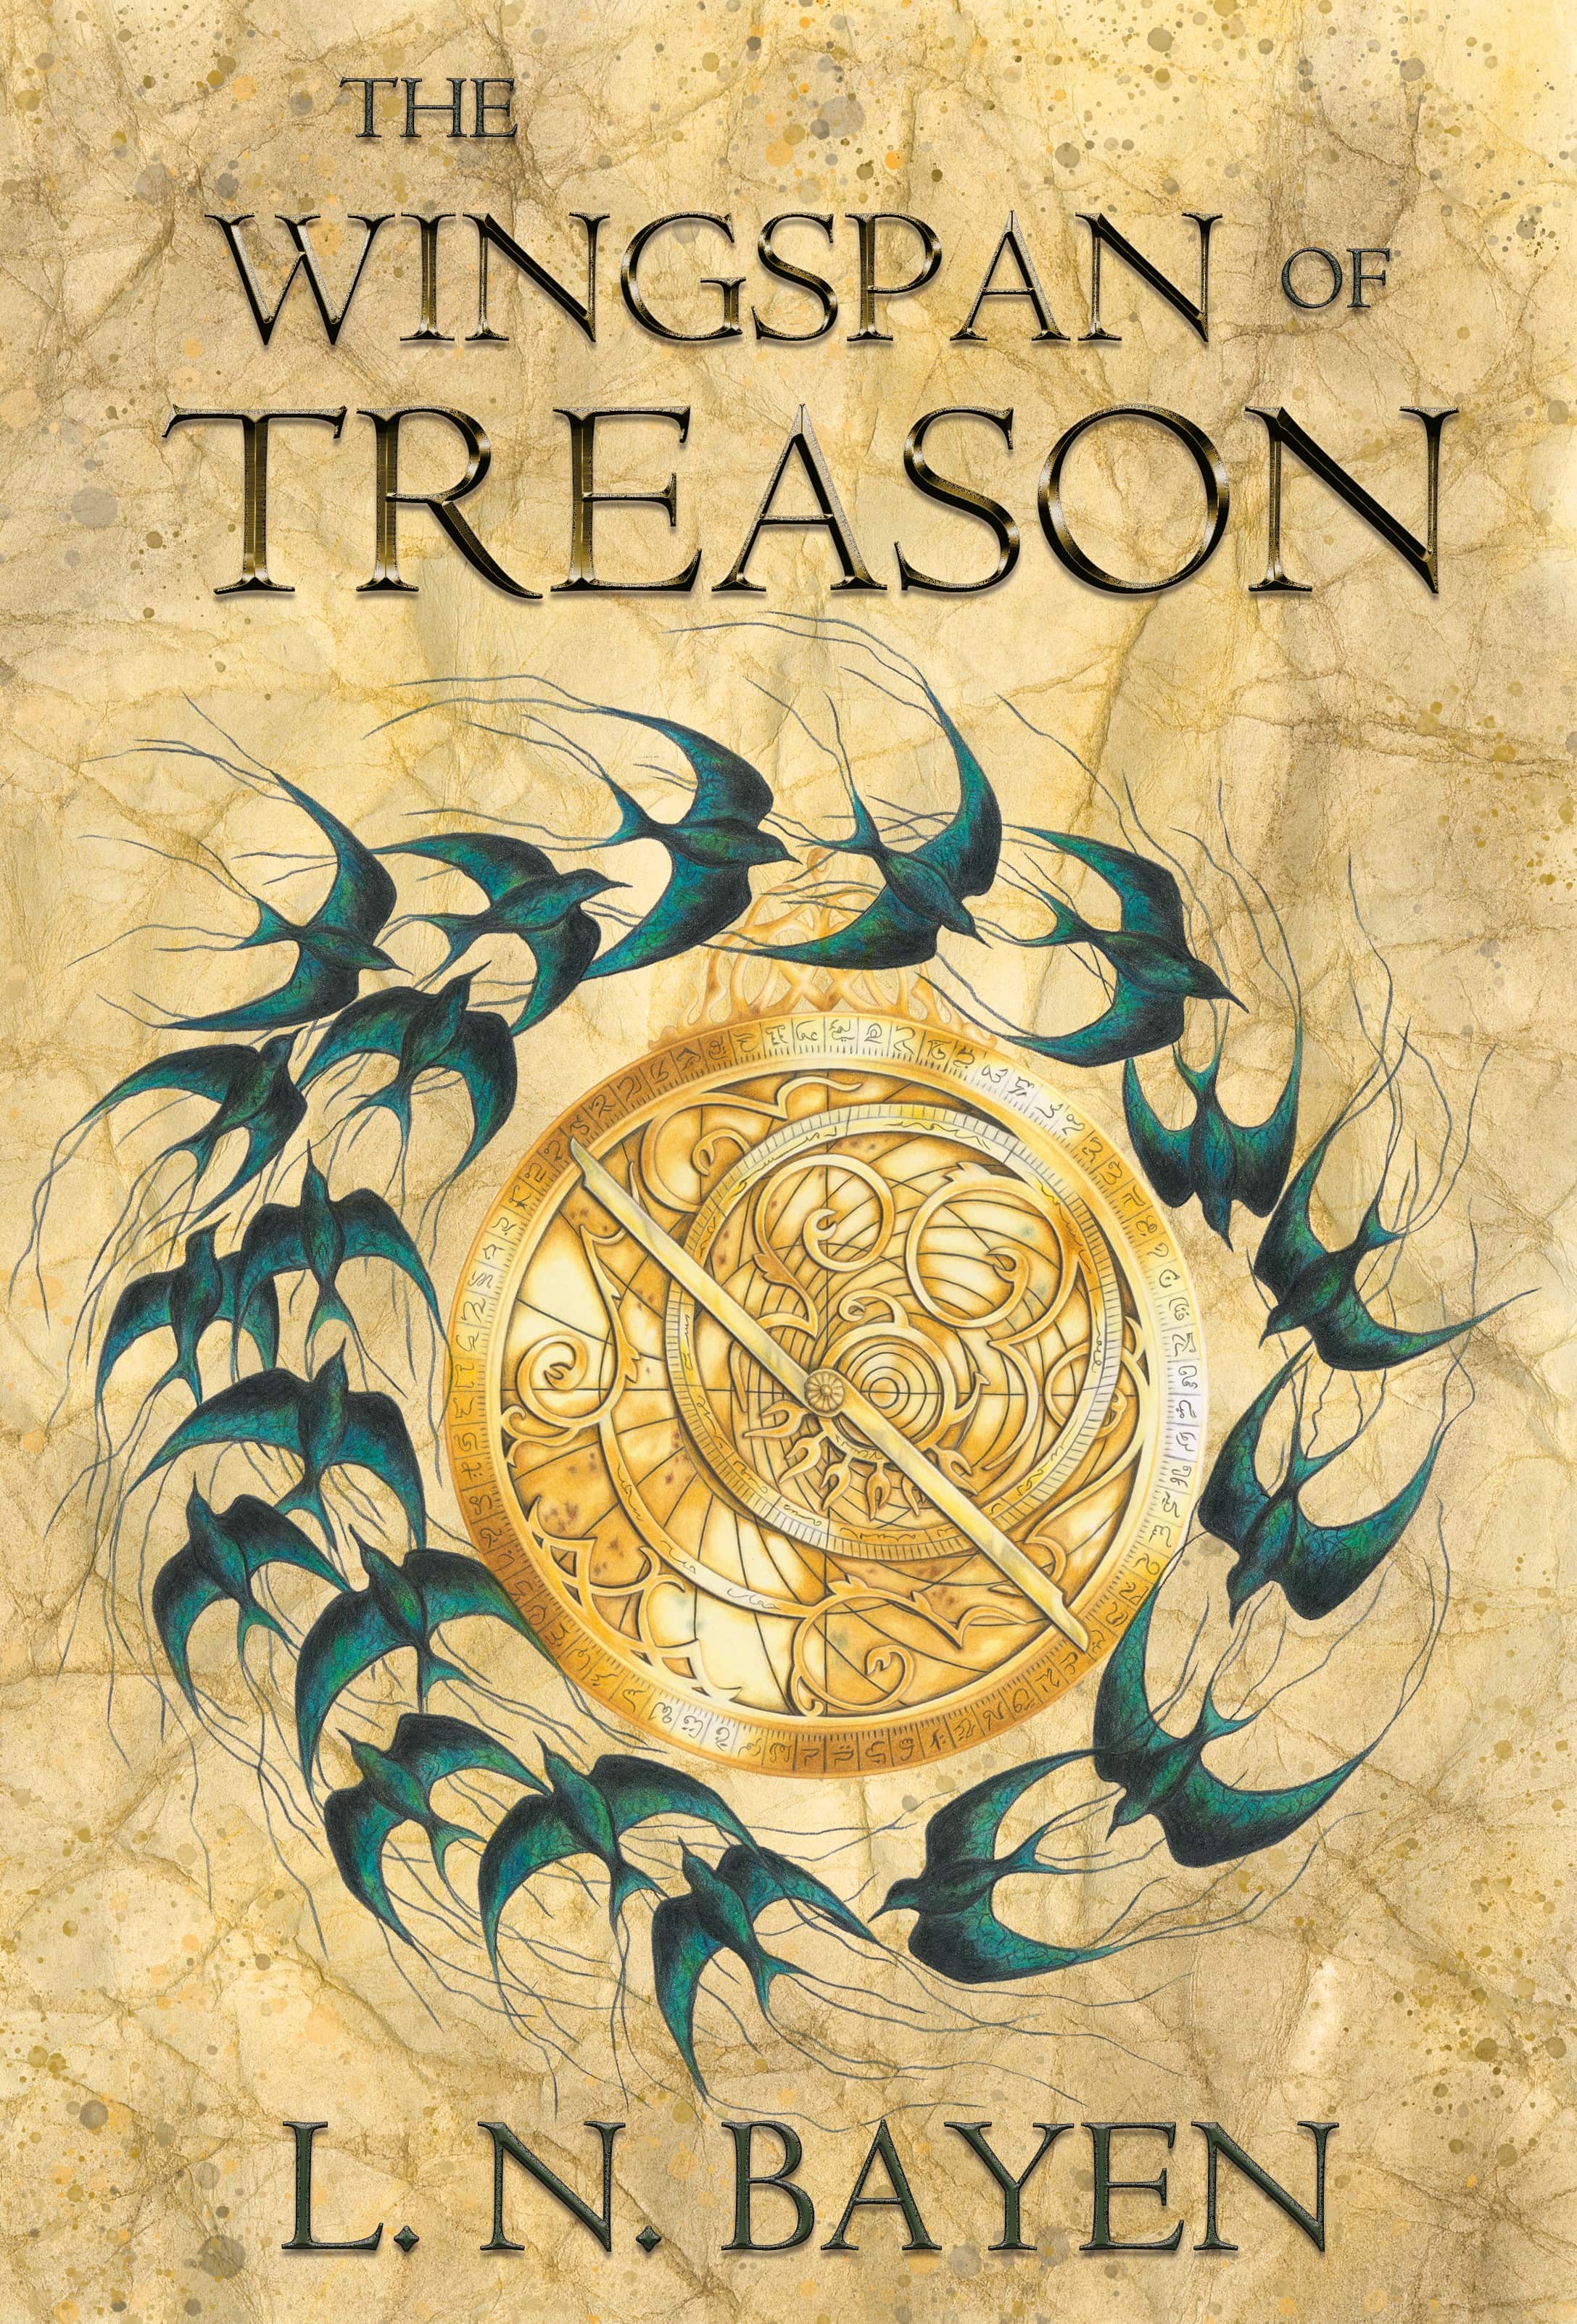 Front cover of The Wingspan of Treason, by L. N. Bayen